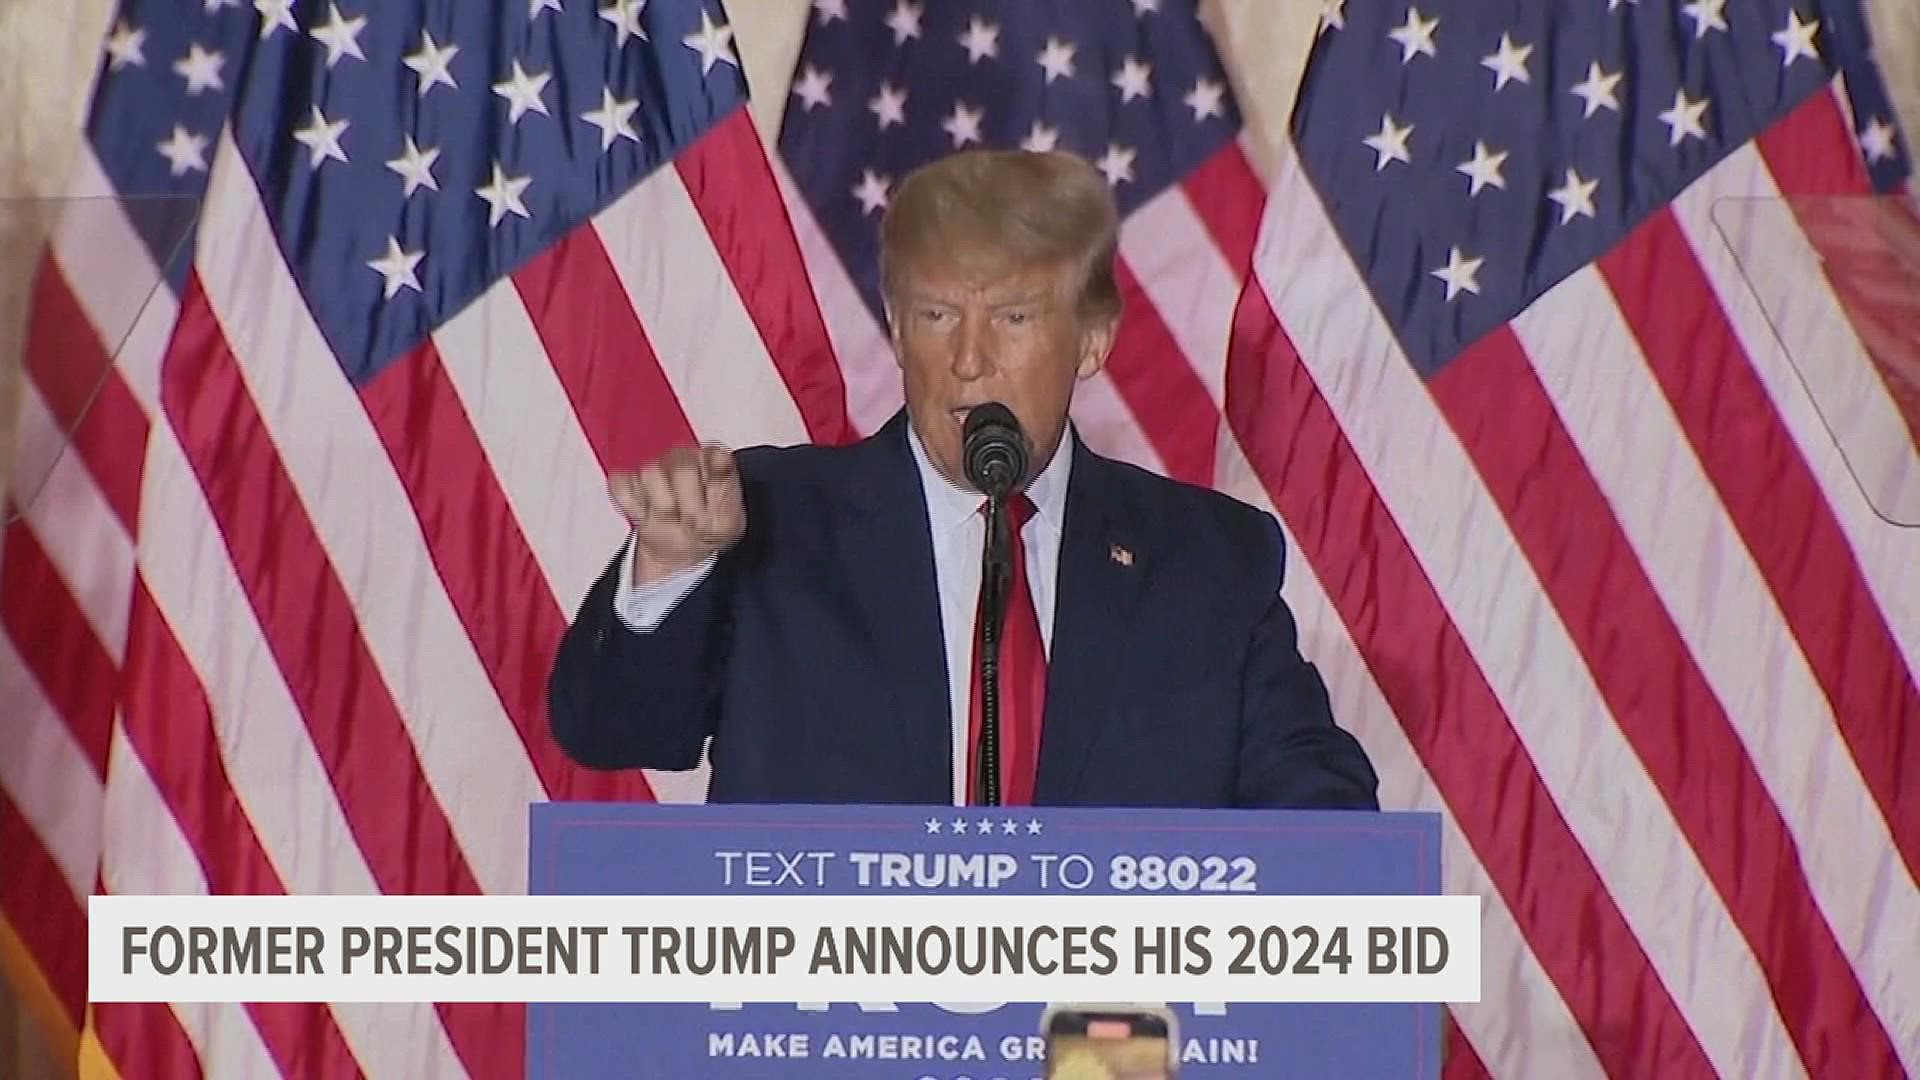 Trump filed his candidacy with the Federal Election Commission. He says his 2024 campaign will be about issues and common sense.